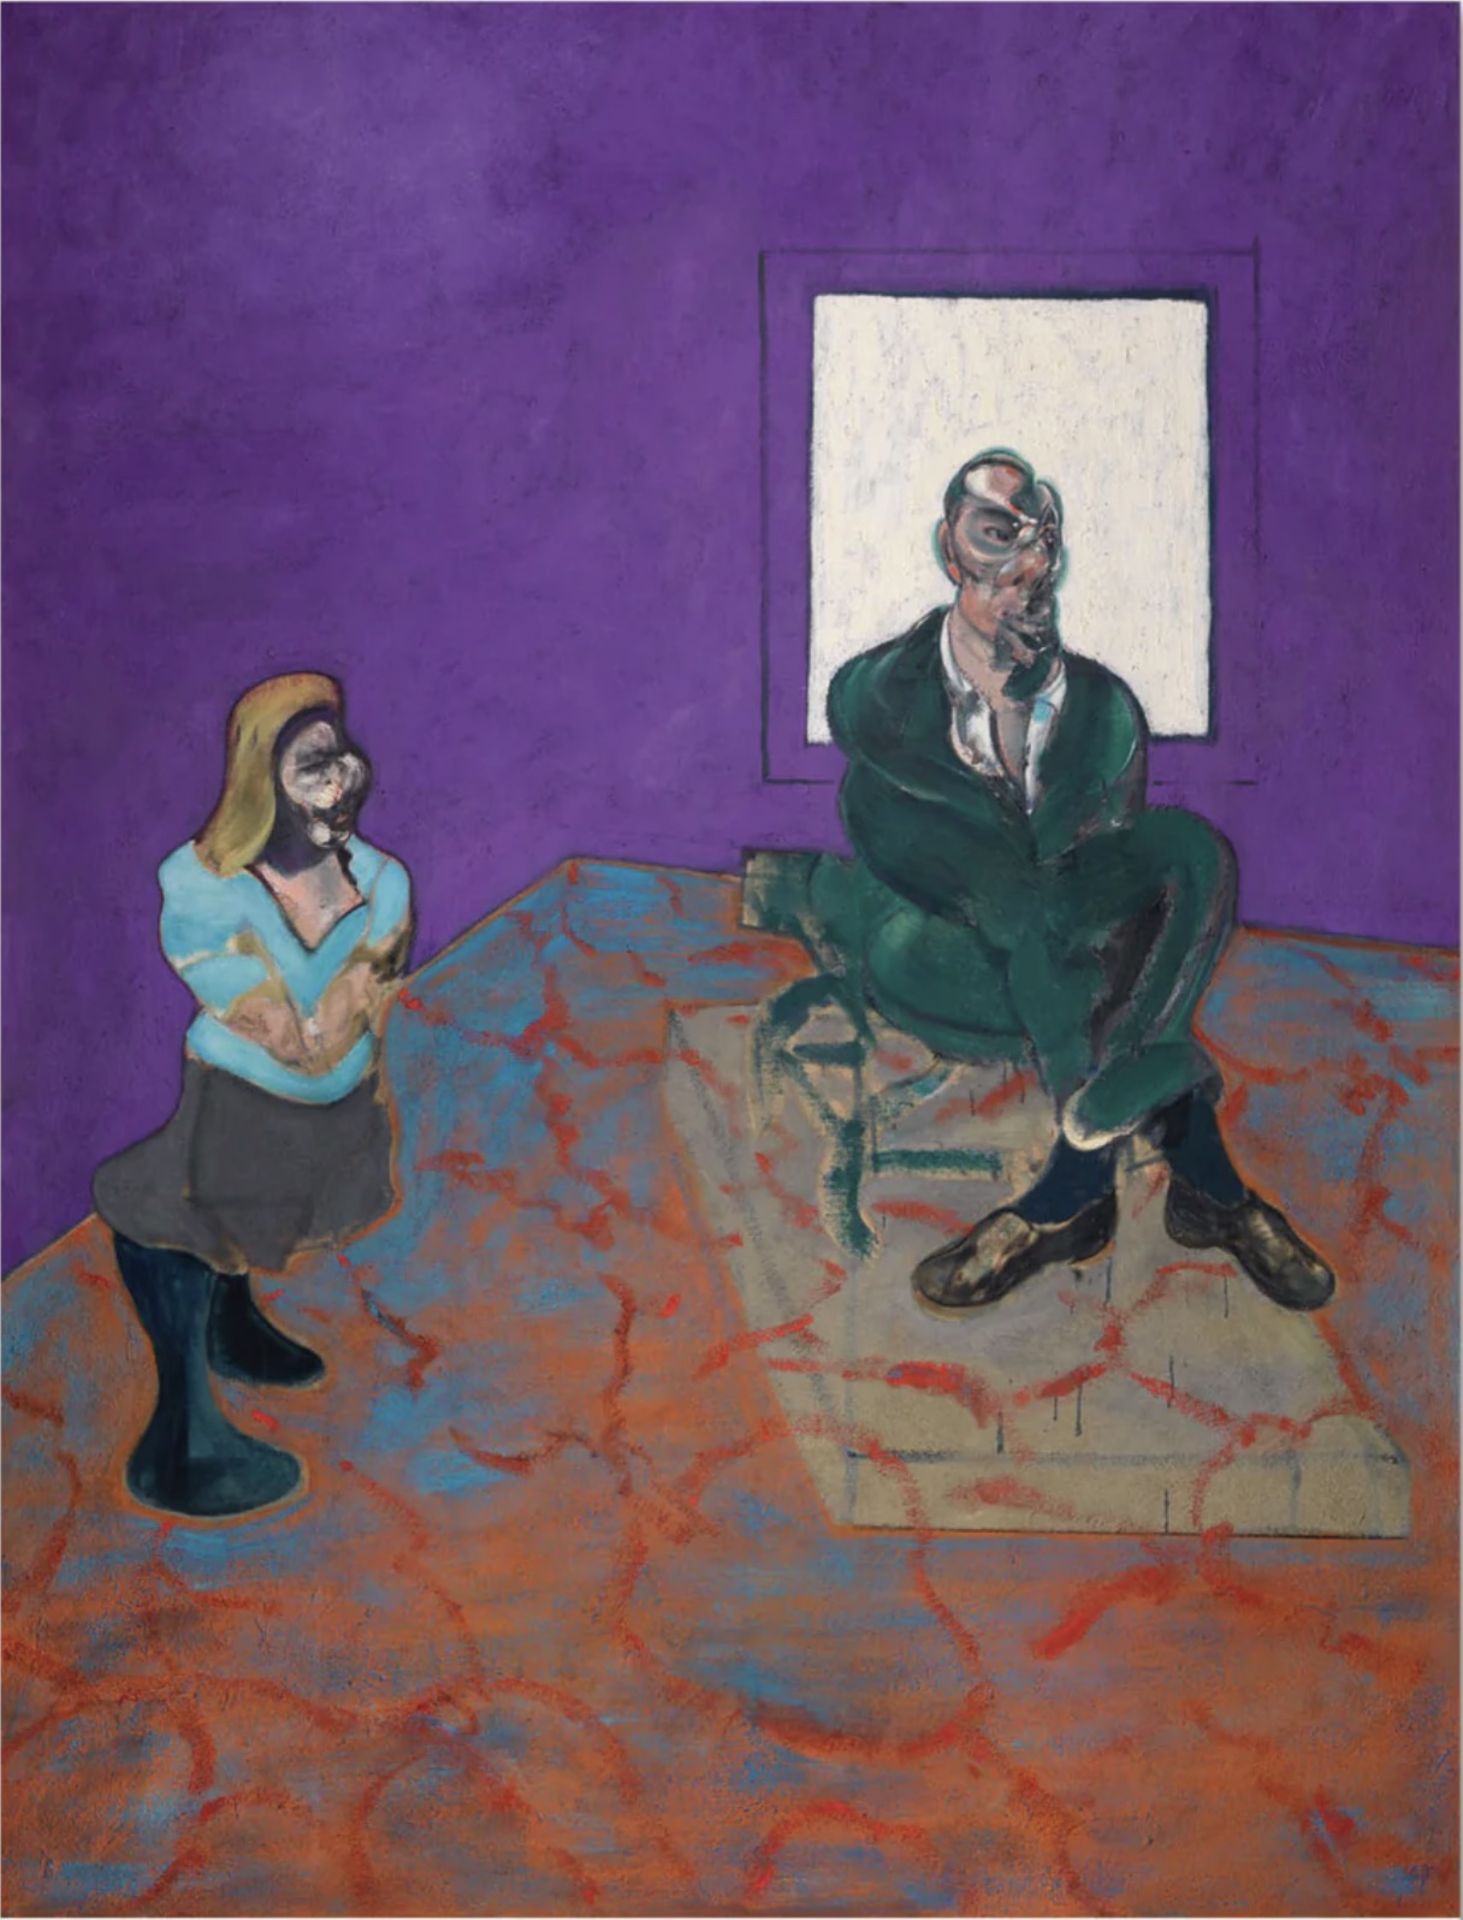 Francis Bacon "Man and Child, 1963" Print